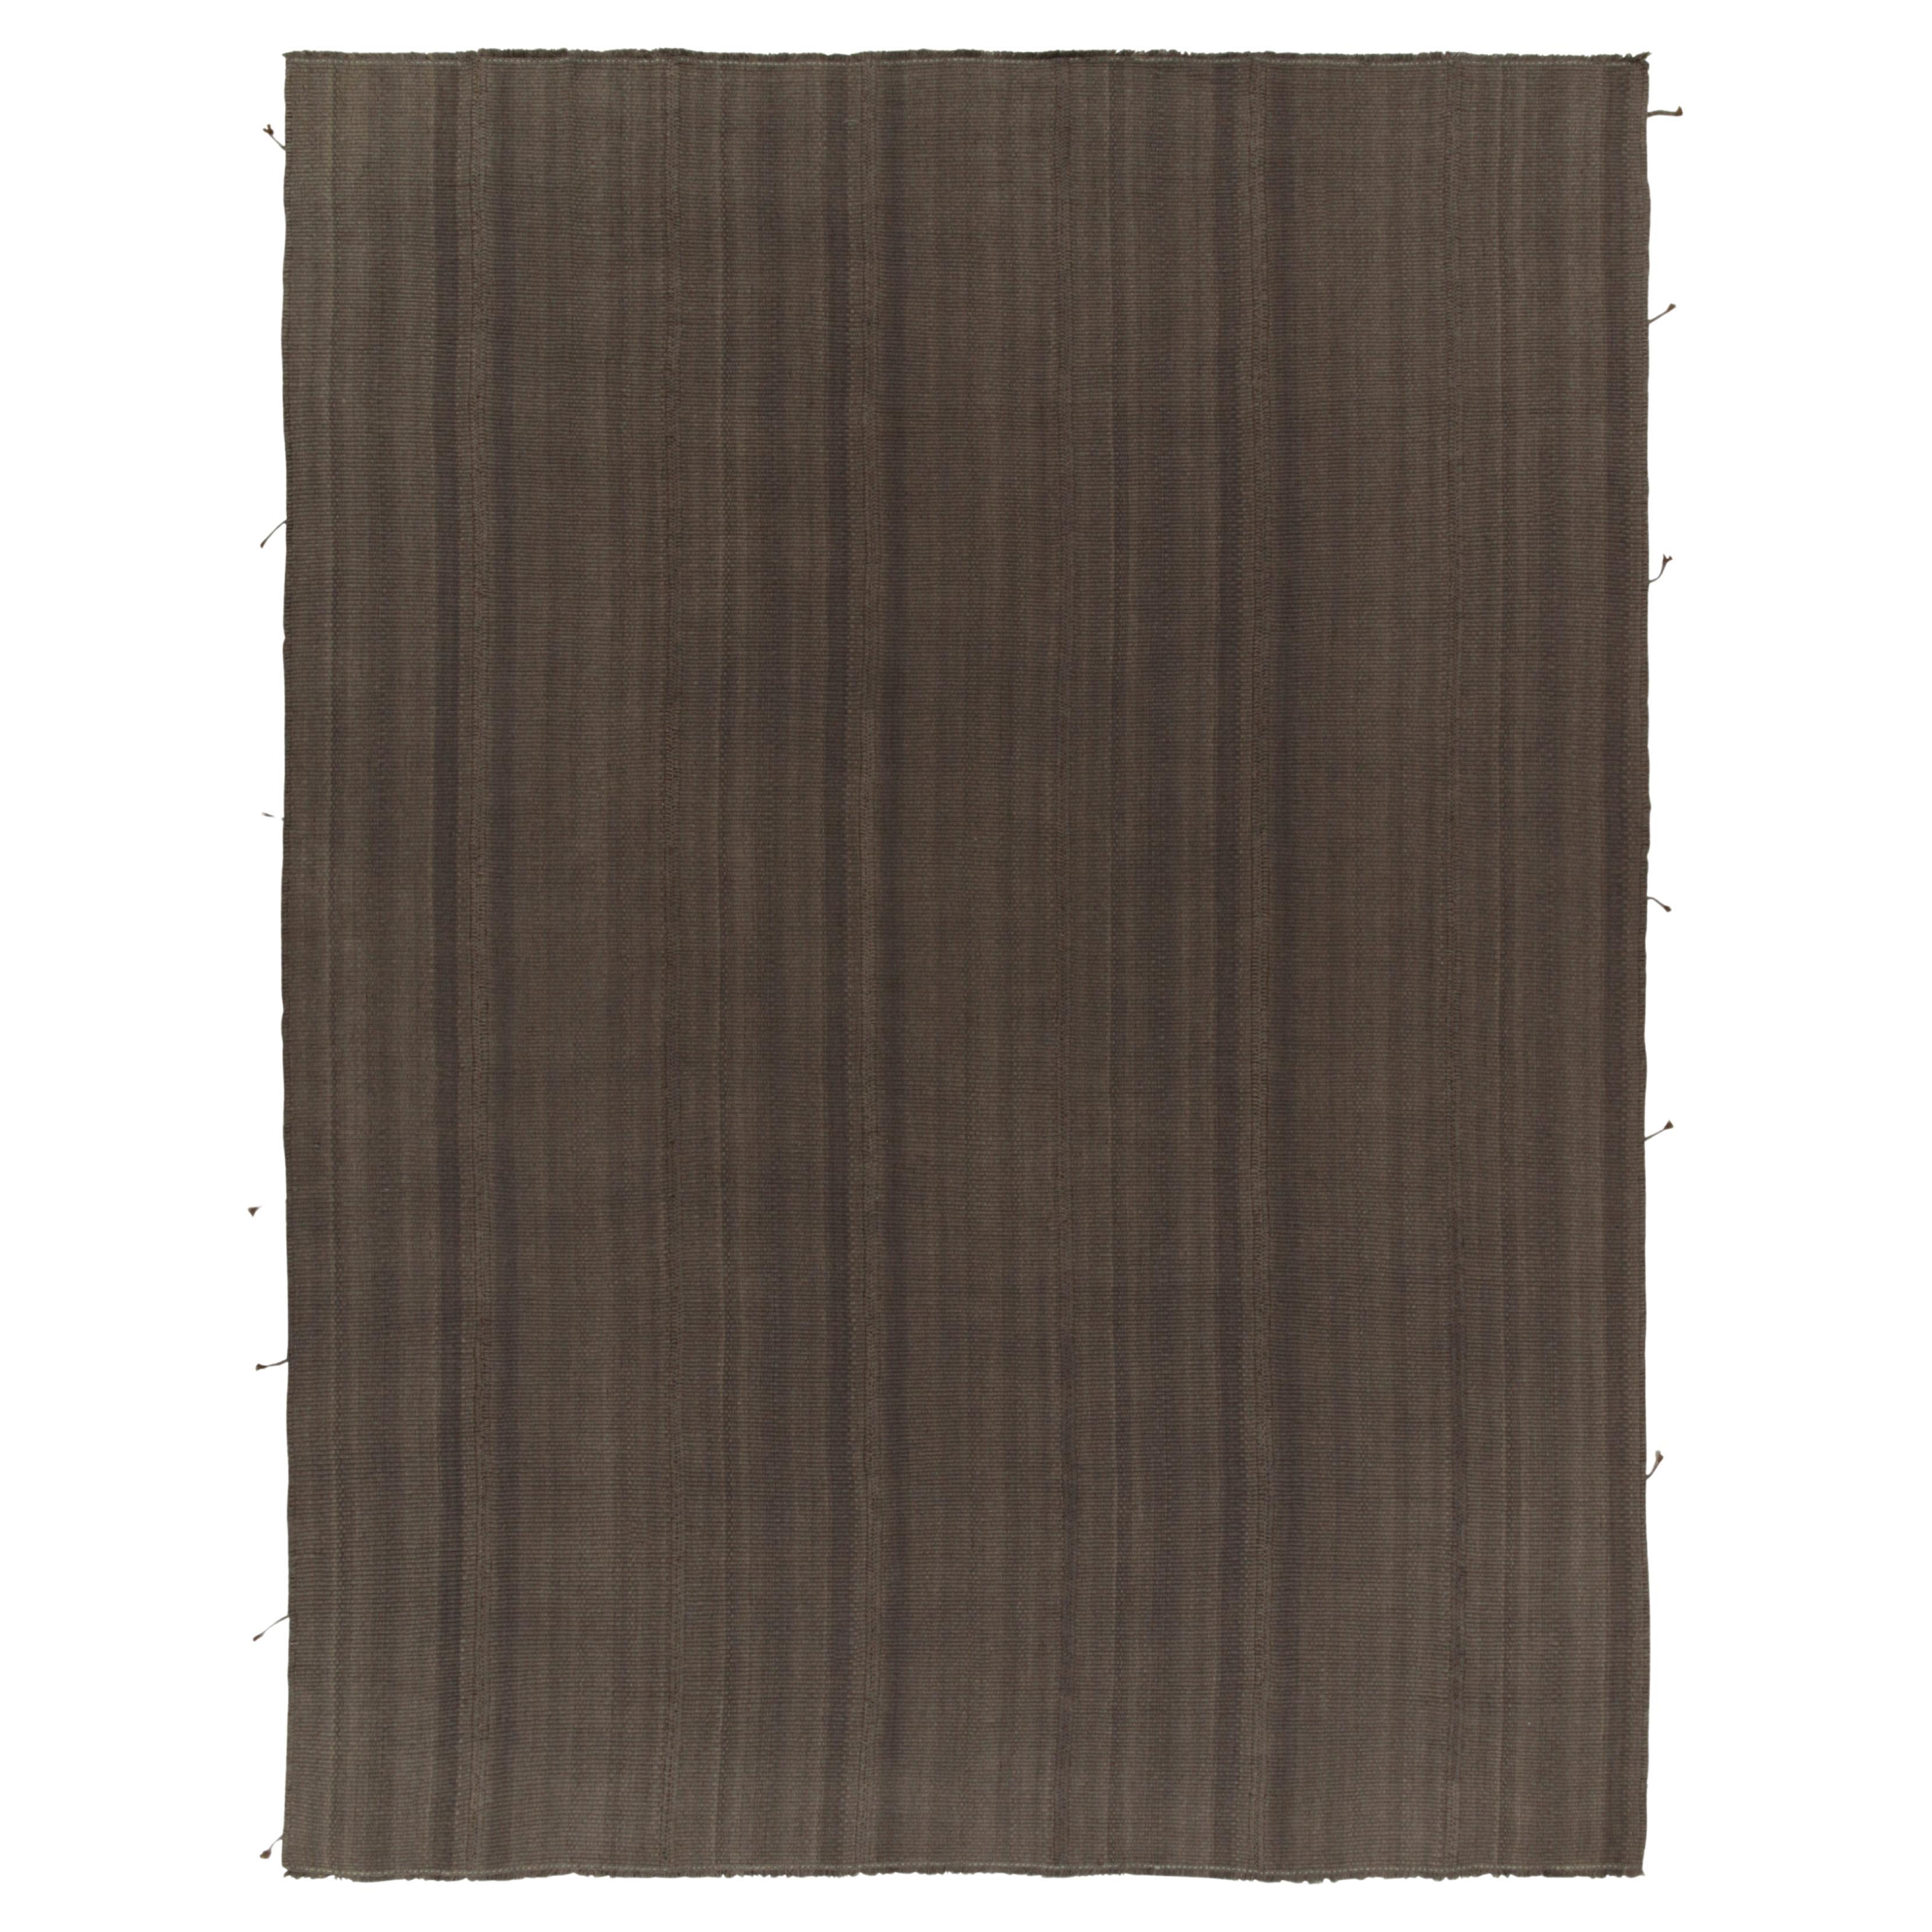 Rug & Kilim’s Contemporary Kilims in Muted Brown Stripes, Panel Woven style For Sale